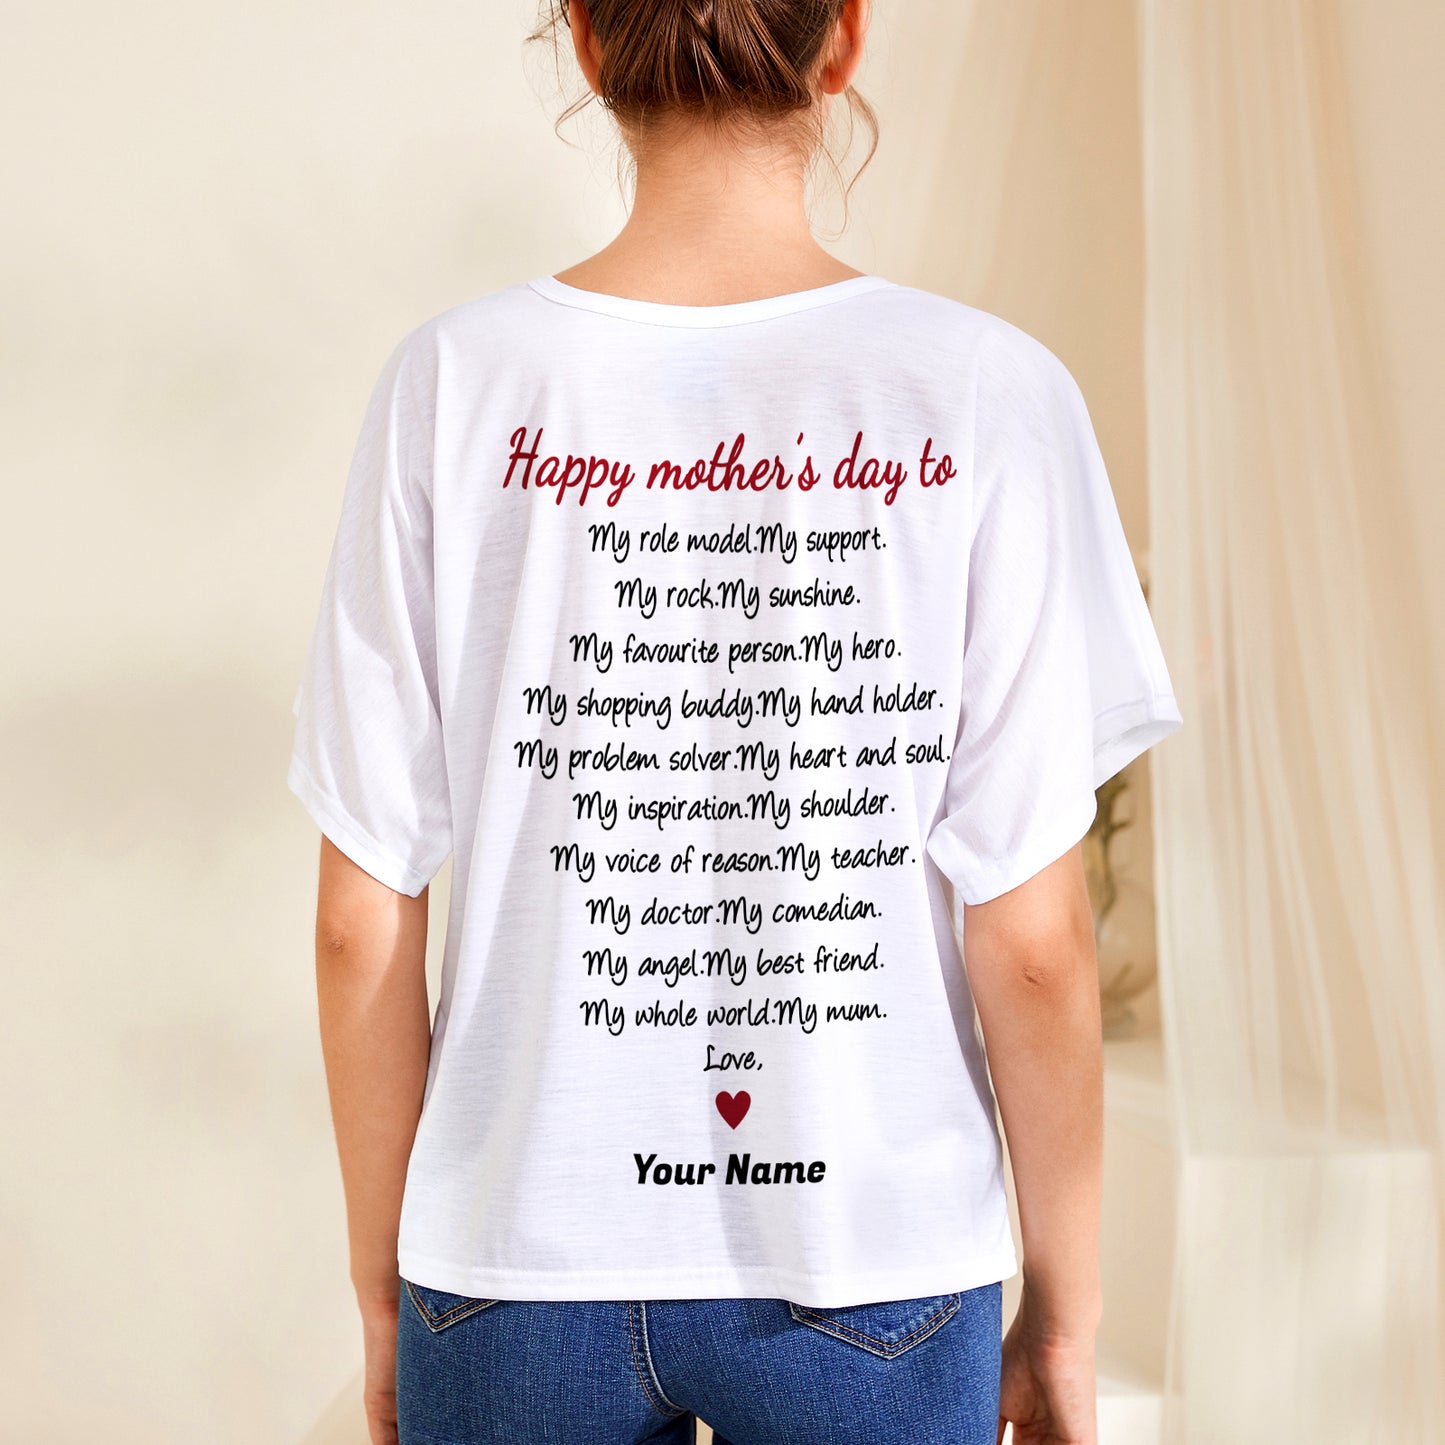 Custmoized Women's Batwing Sleeve T-Shirt - Upload your photo, Personalized gifts for mom